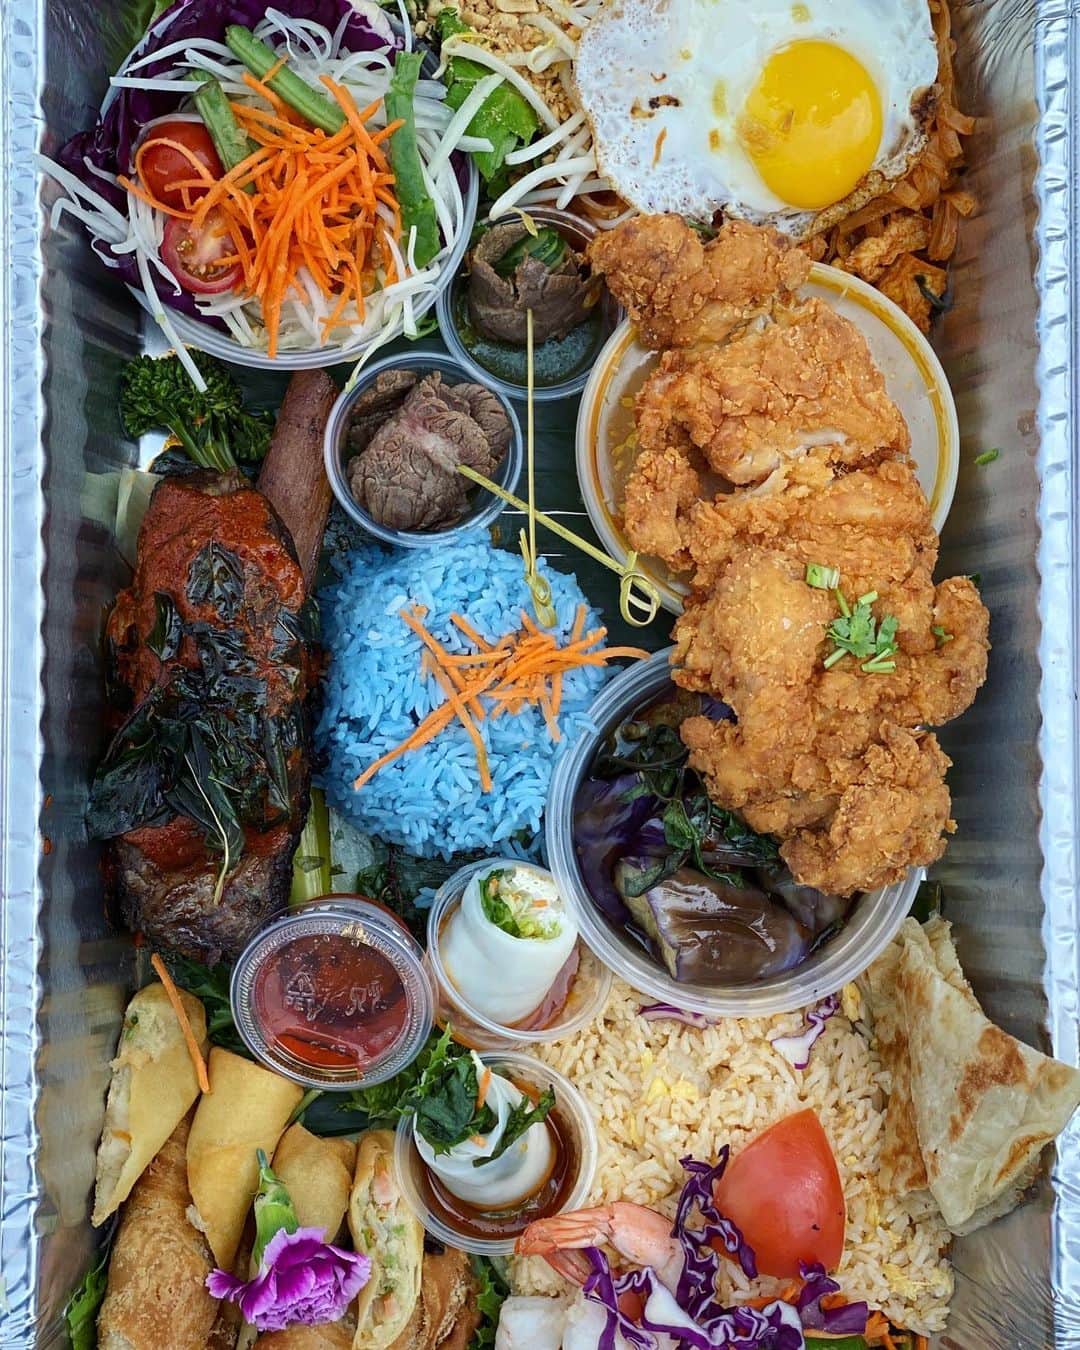 Antonietteのインスタグラム：「On our picnic at the park in SF we ordered The Little Lao set from @thaifarmhouse. It was a feast for the senses! Arranged aesthetically pleasing in a large catering tray, we devoured this in the park with onlookers curious to see what we were eating. 😬 Come on, social distance, 6 feet bro!😷⬅️6️⃣➡️😷Oh my gosh, it was so good. The tray came with fresh rolls with peanut sauce, samosas, egg rolls, papaya salad, num tok rolls made with grilled wagyu beef flank, hat yai fried chicken, shrimp fried rice, pad Thai, spicy eggplant, blue rice and 2 Thai ice tea OR 2 Singha Beers...and a kids meal of pad see ew! So well done, so delicious. Thanks @thaifarmhouse for a memorable meal! 😋」